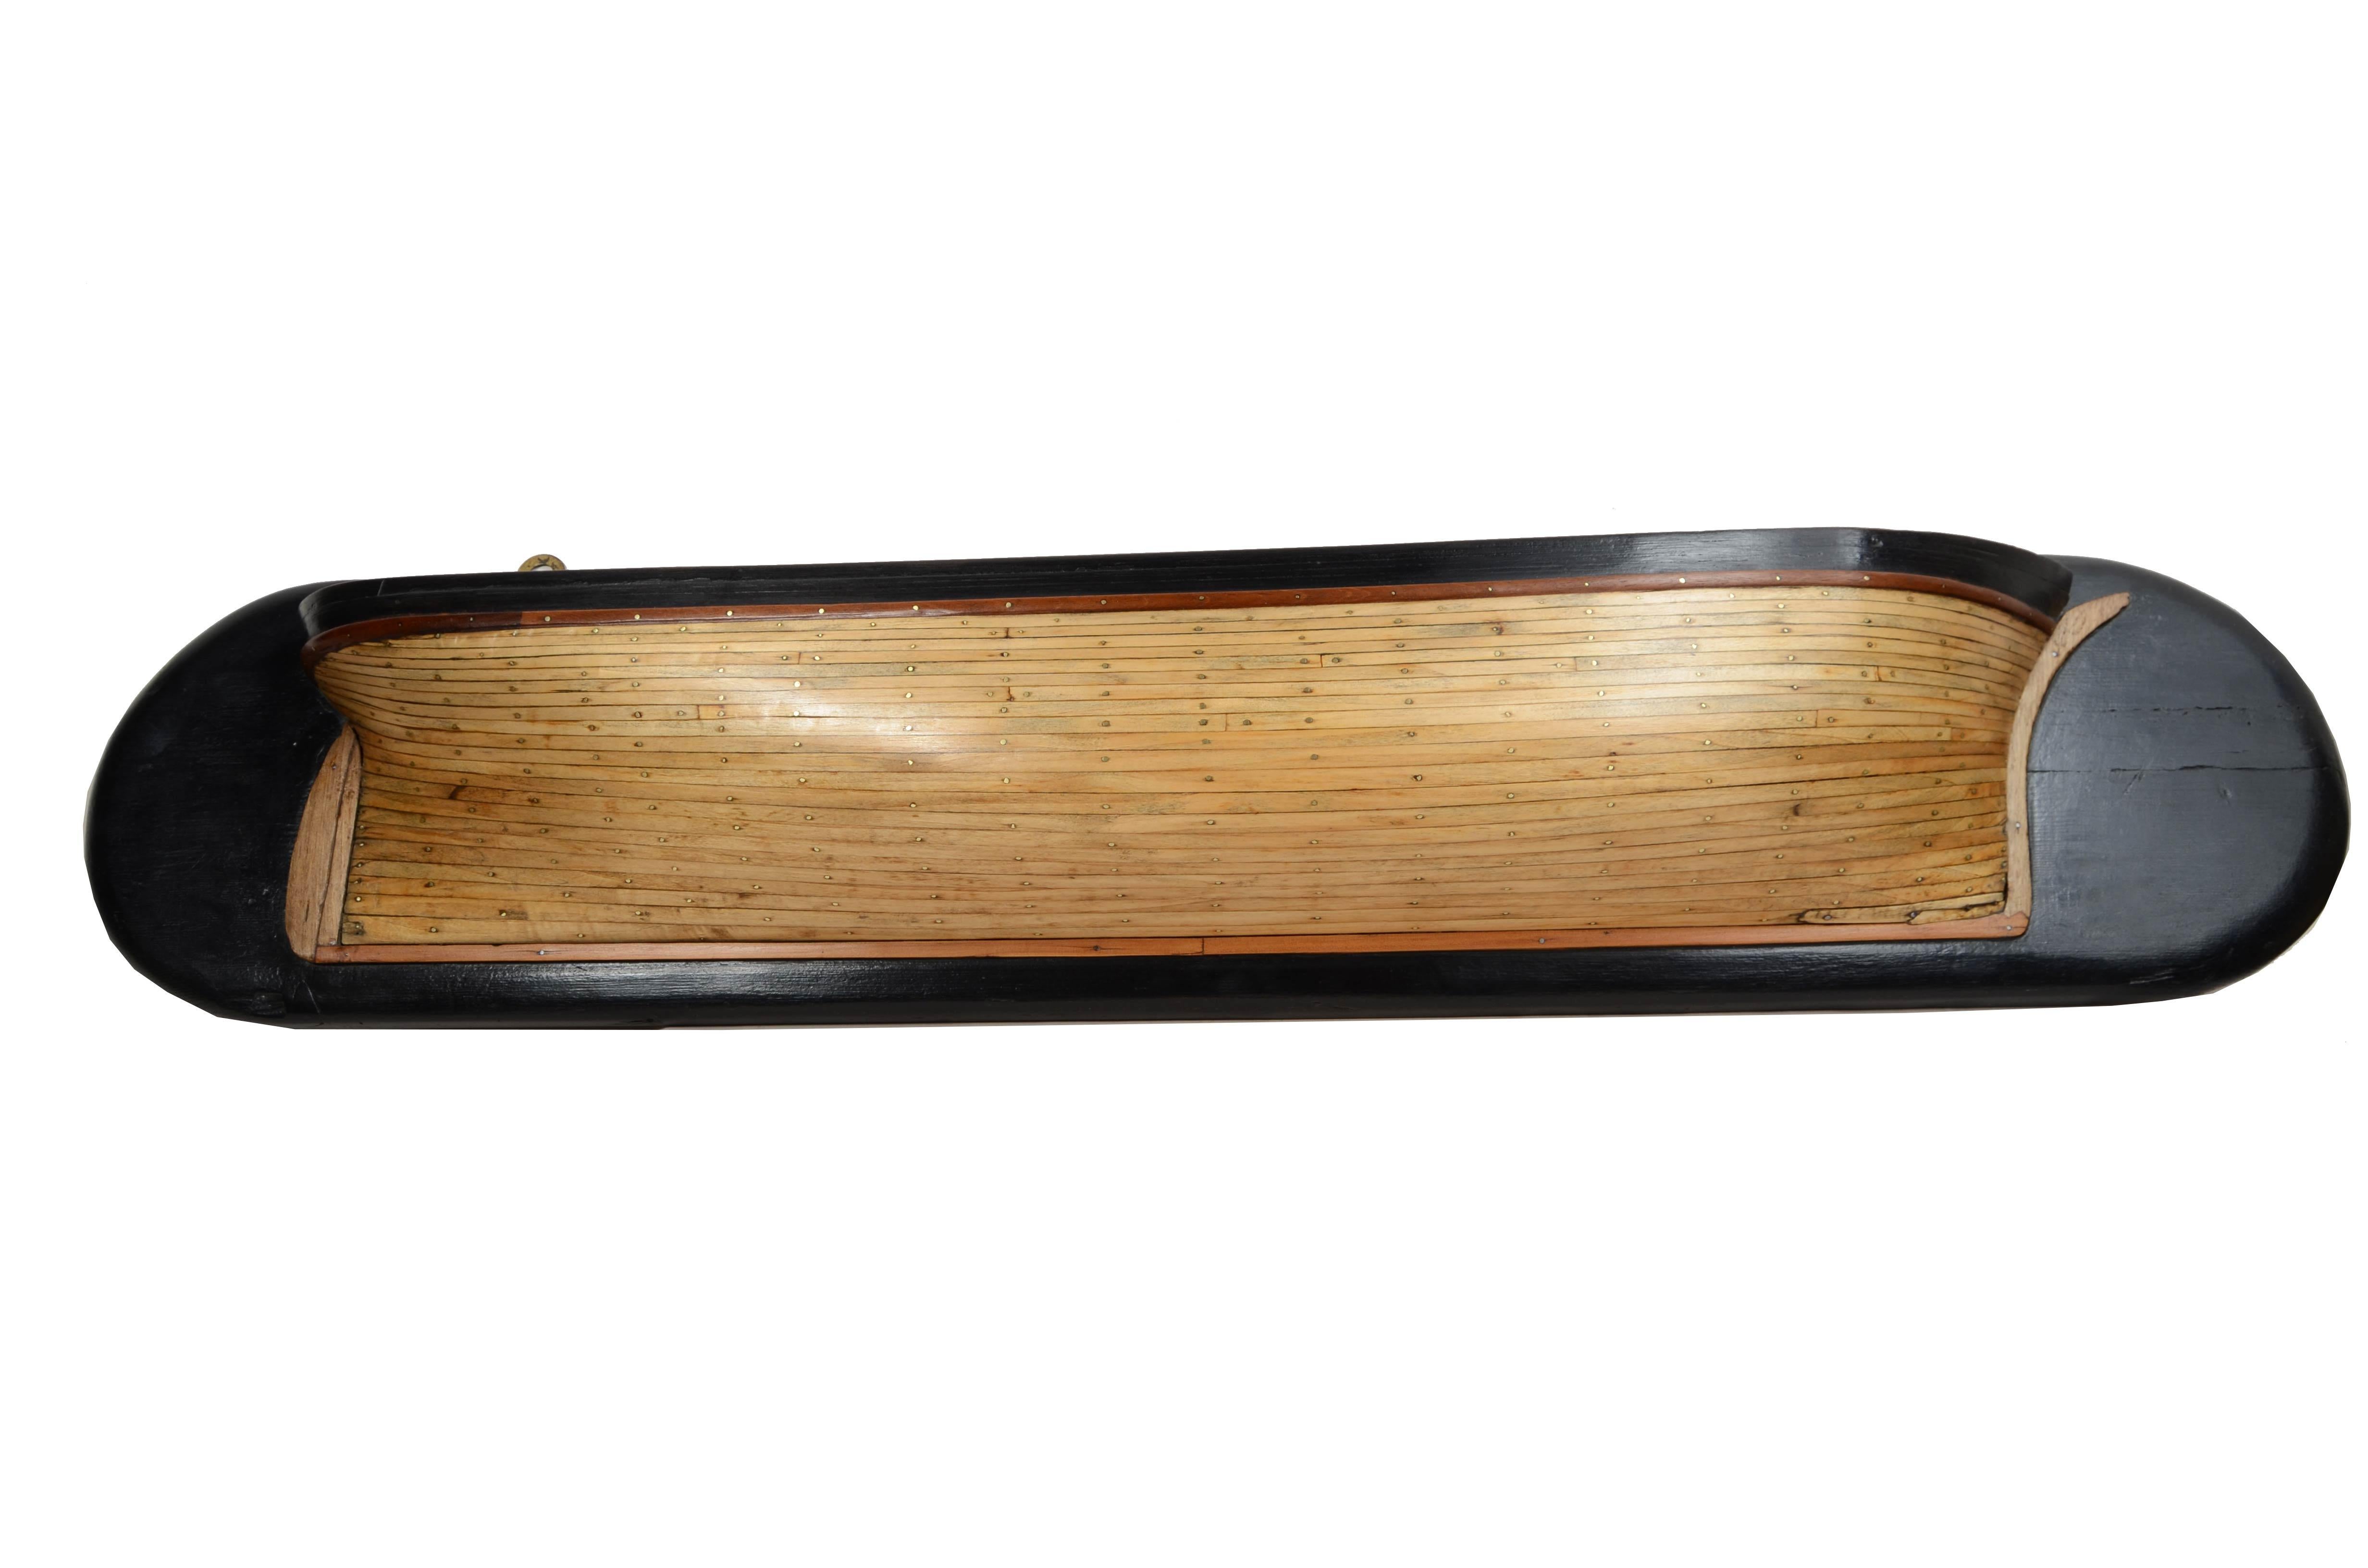 Second half of the 19th century half-hull of an English schooner  wooden planking nailed and mounted on  ebonized wooden board. 
Good condition, board measures 100x 13x21 cm - inches 39.4x5.1x8.3. 
The half-hull, used to design boats, was the tool